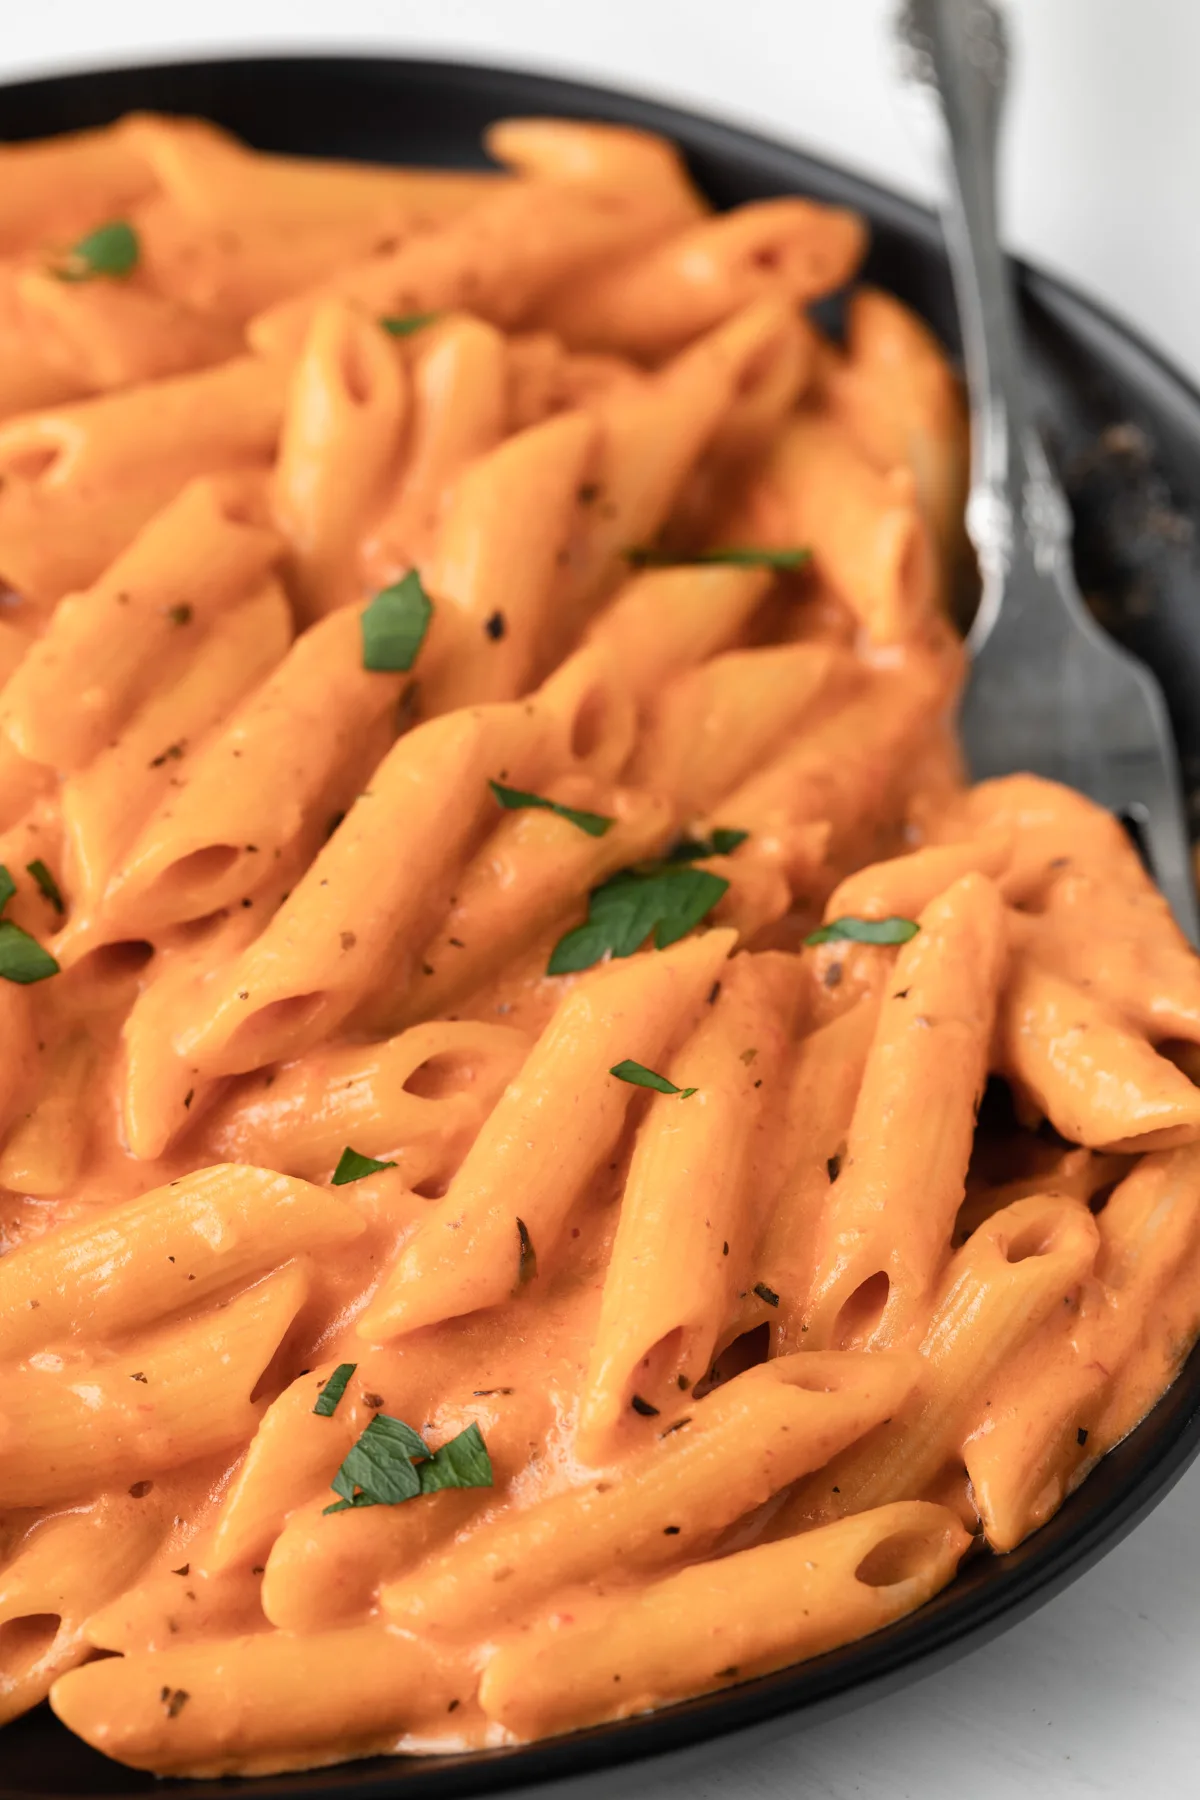 Close up of pasta coated in pink sauce.